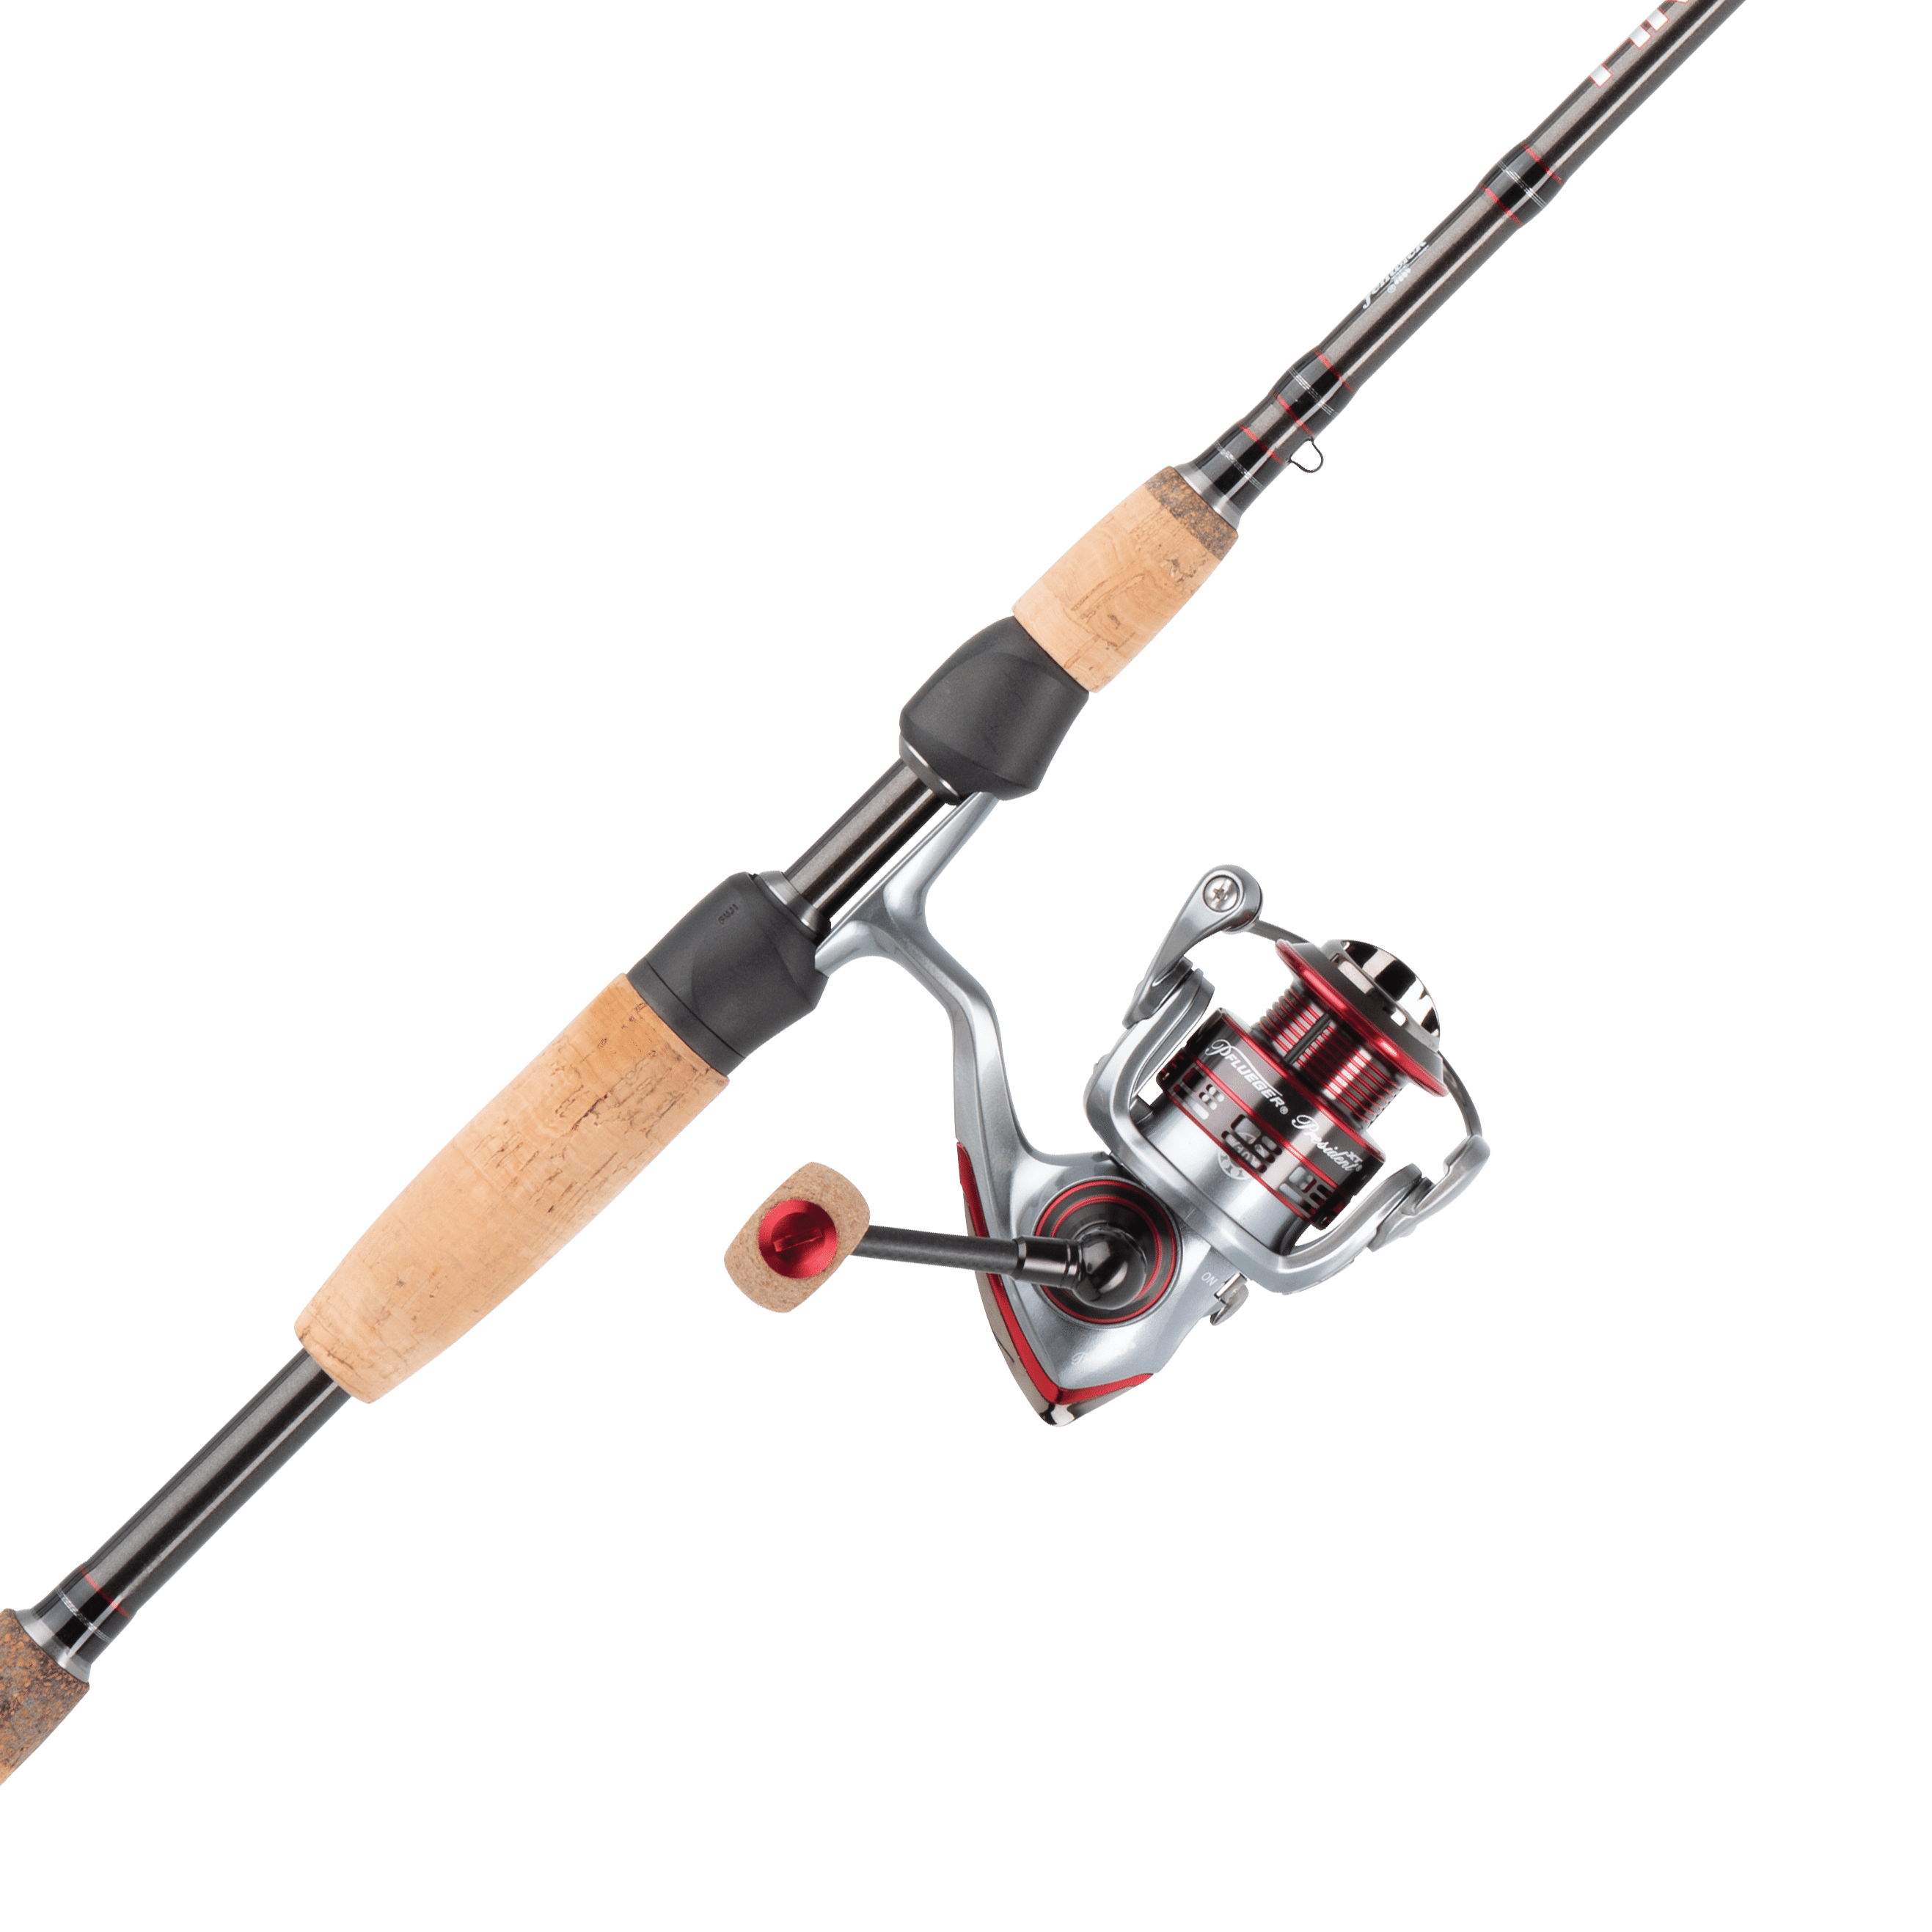 Pflueger 7' Trion Spinning Rod and Reel Combo, Size 35 Reel